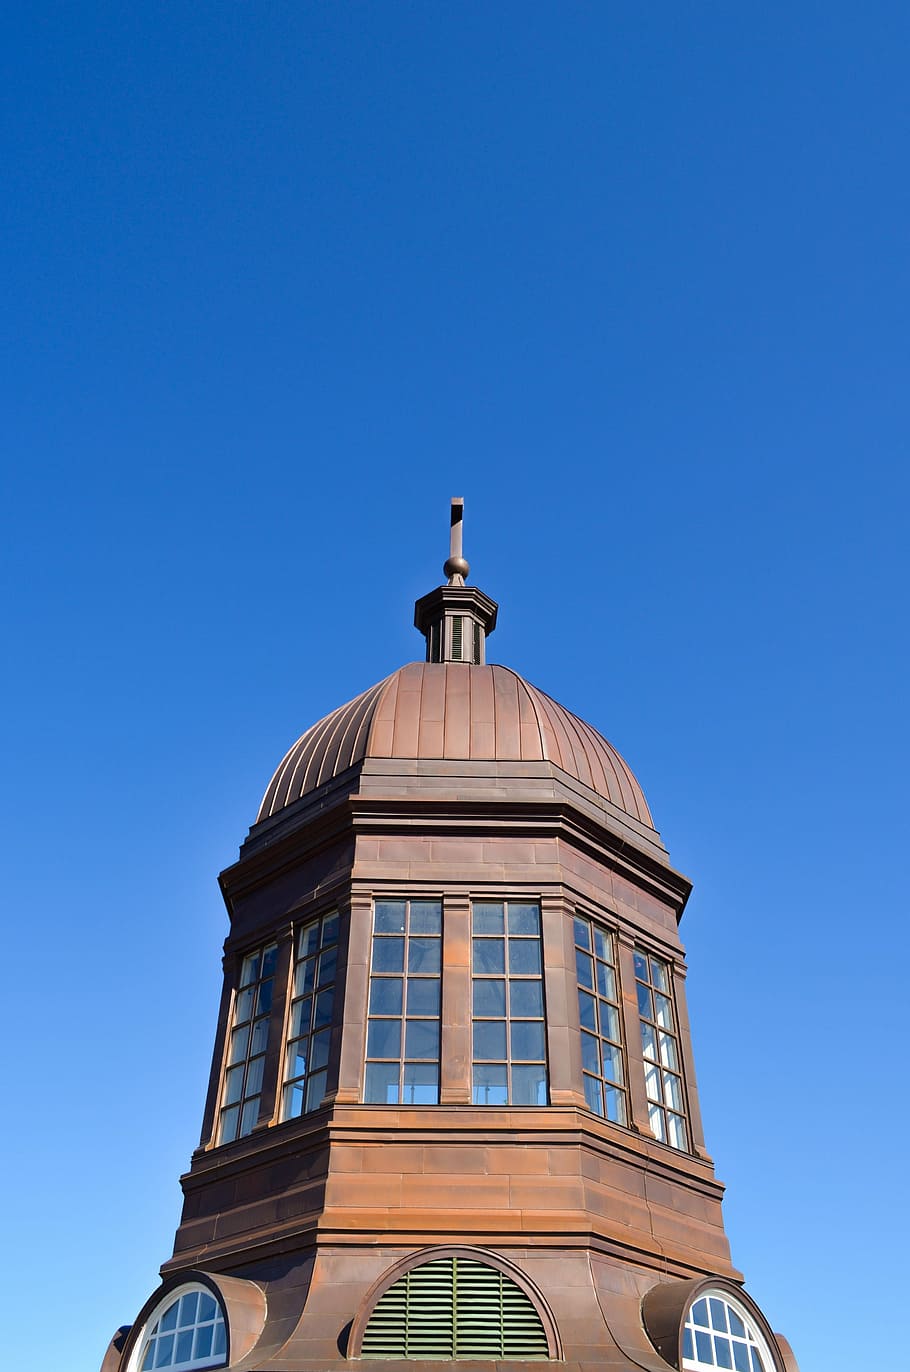 Dome, Architecture, Building, Glass, sky, architecture, building, cross, lookout, tower, view